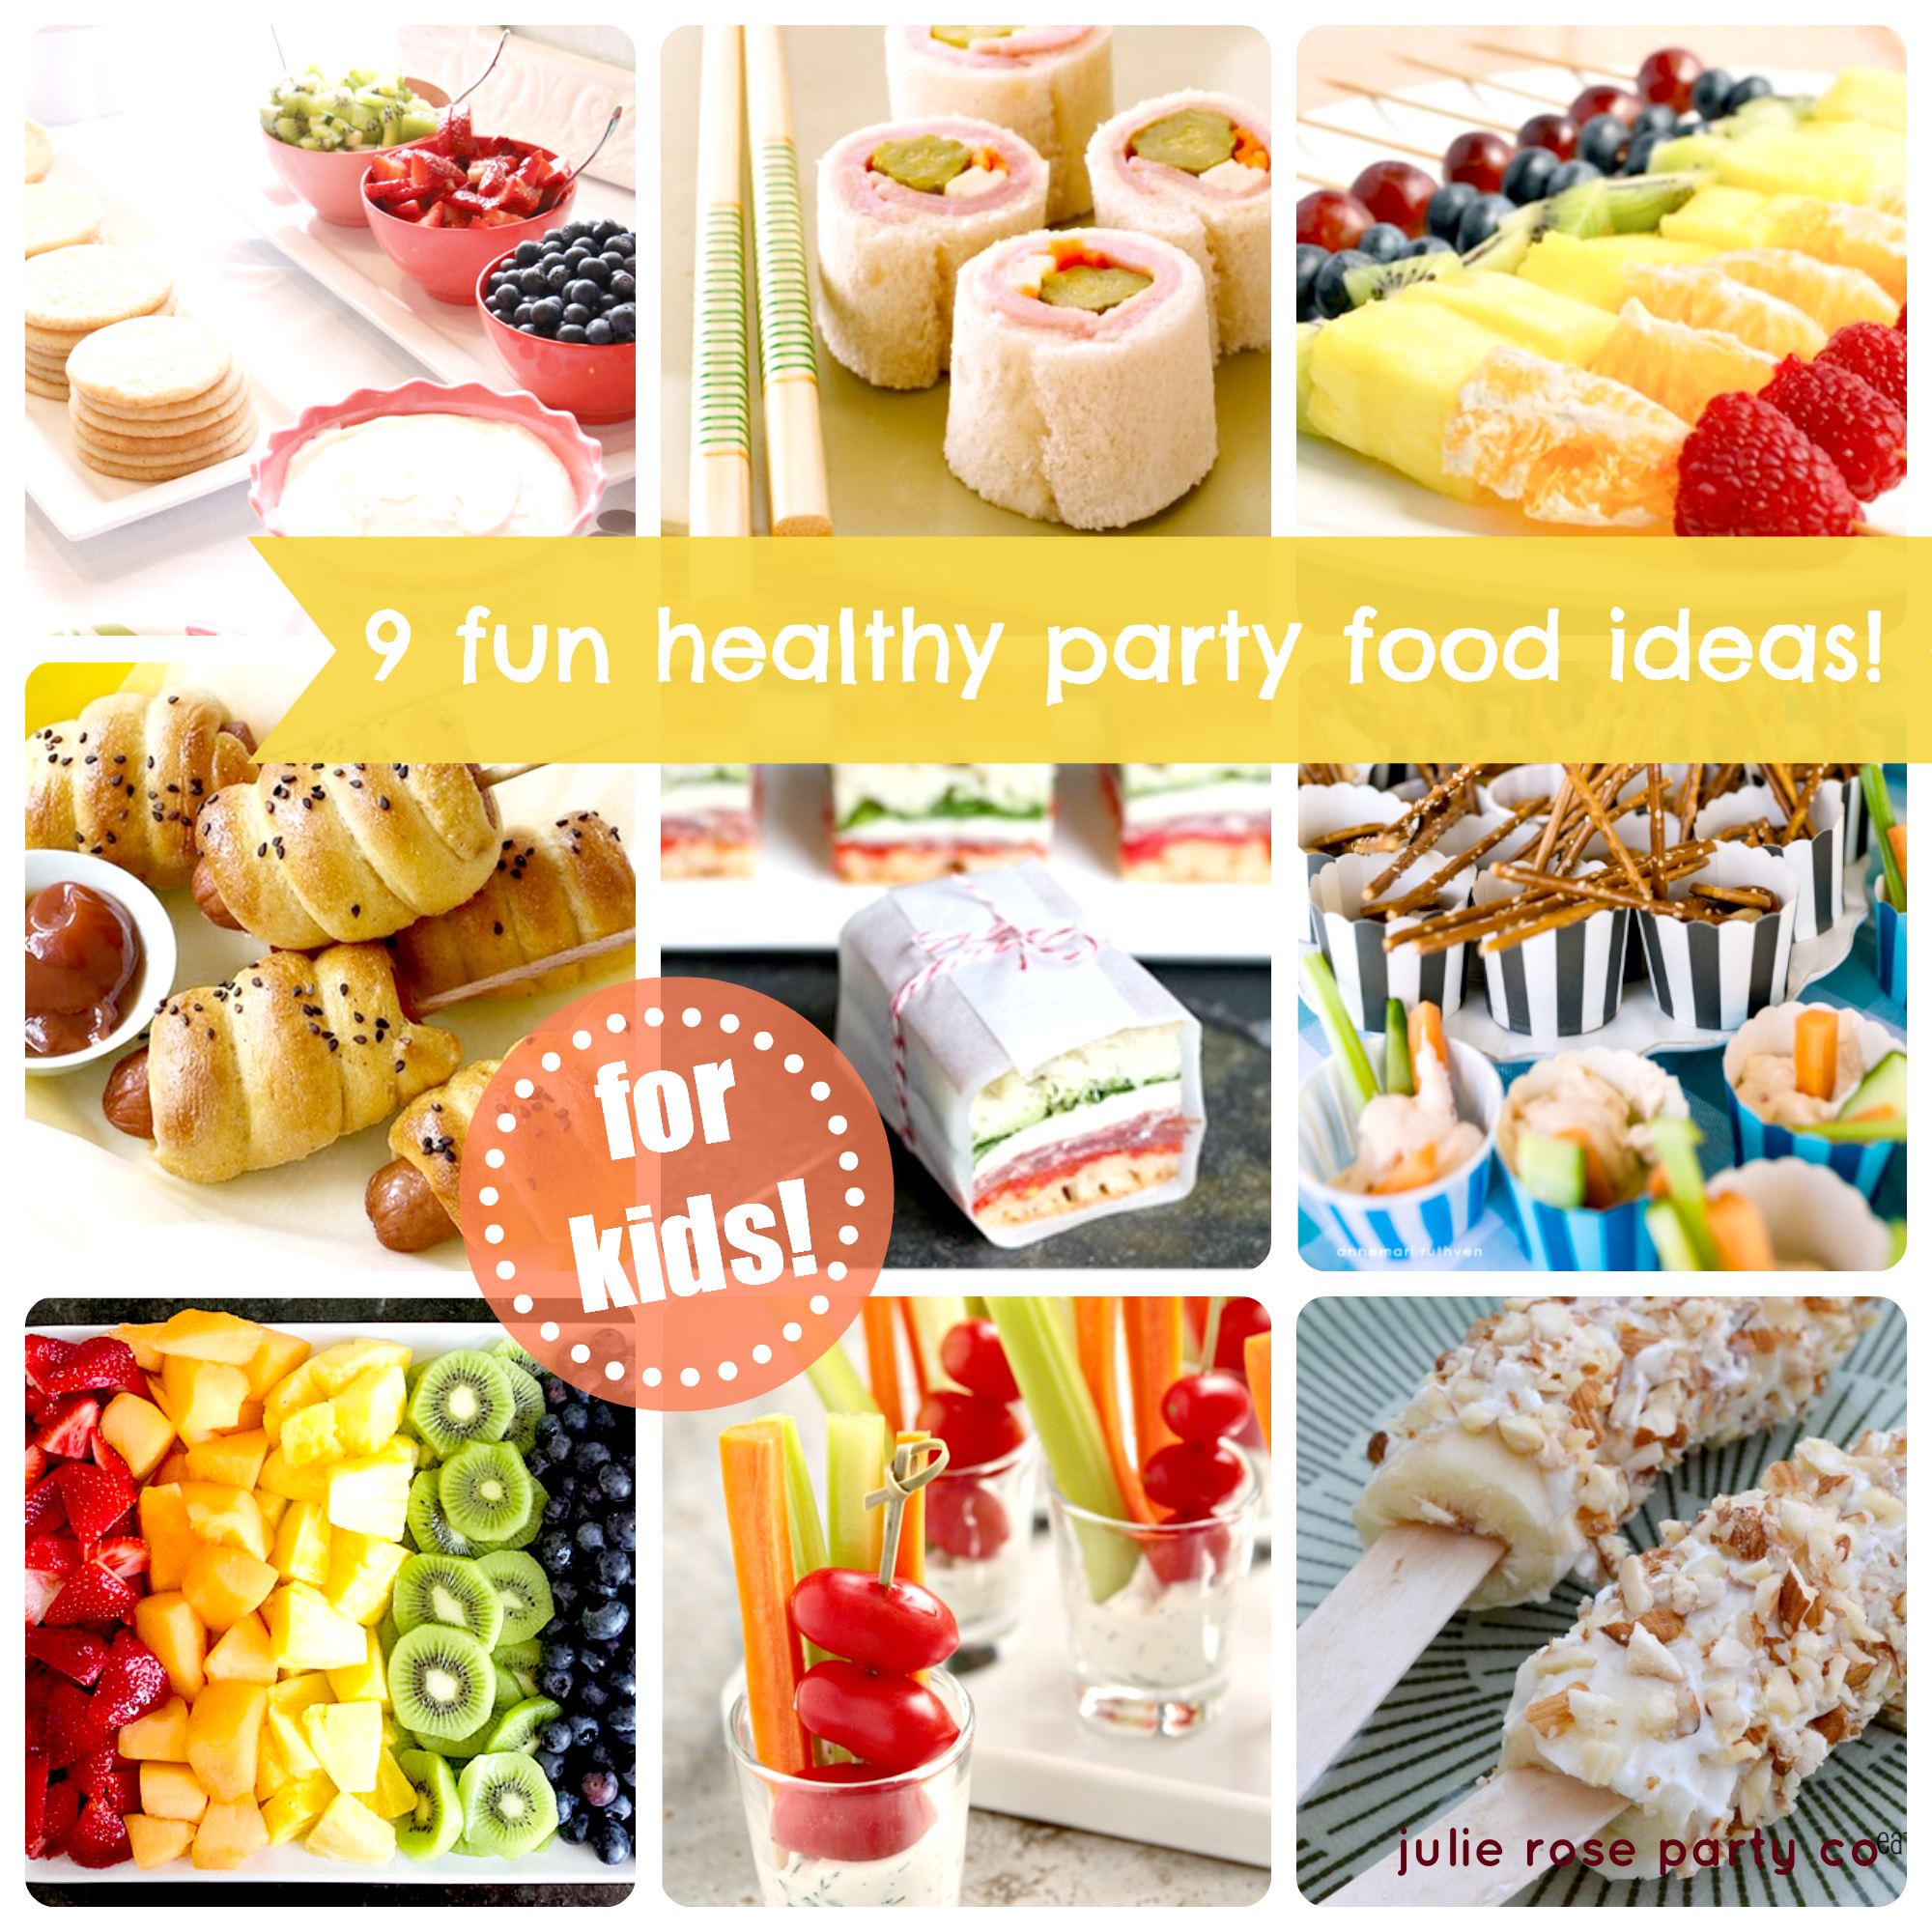 9 fun and healthy party food ideas kids | julie rose party co.